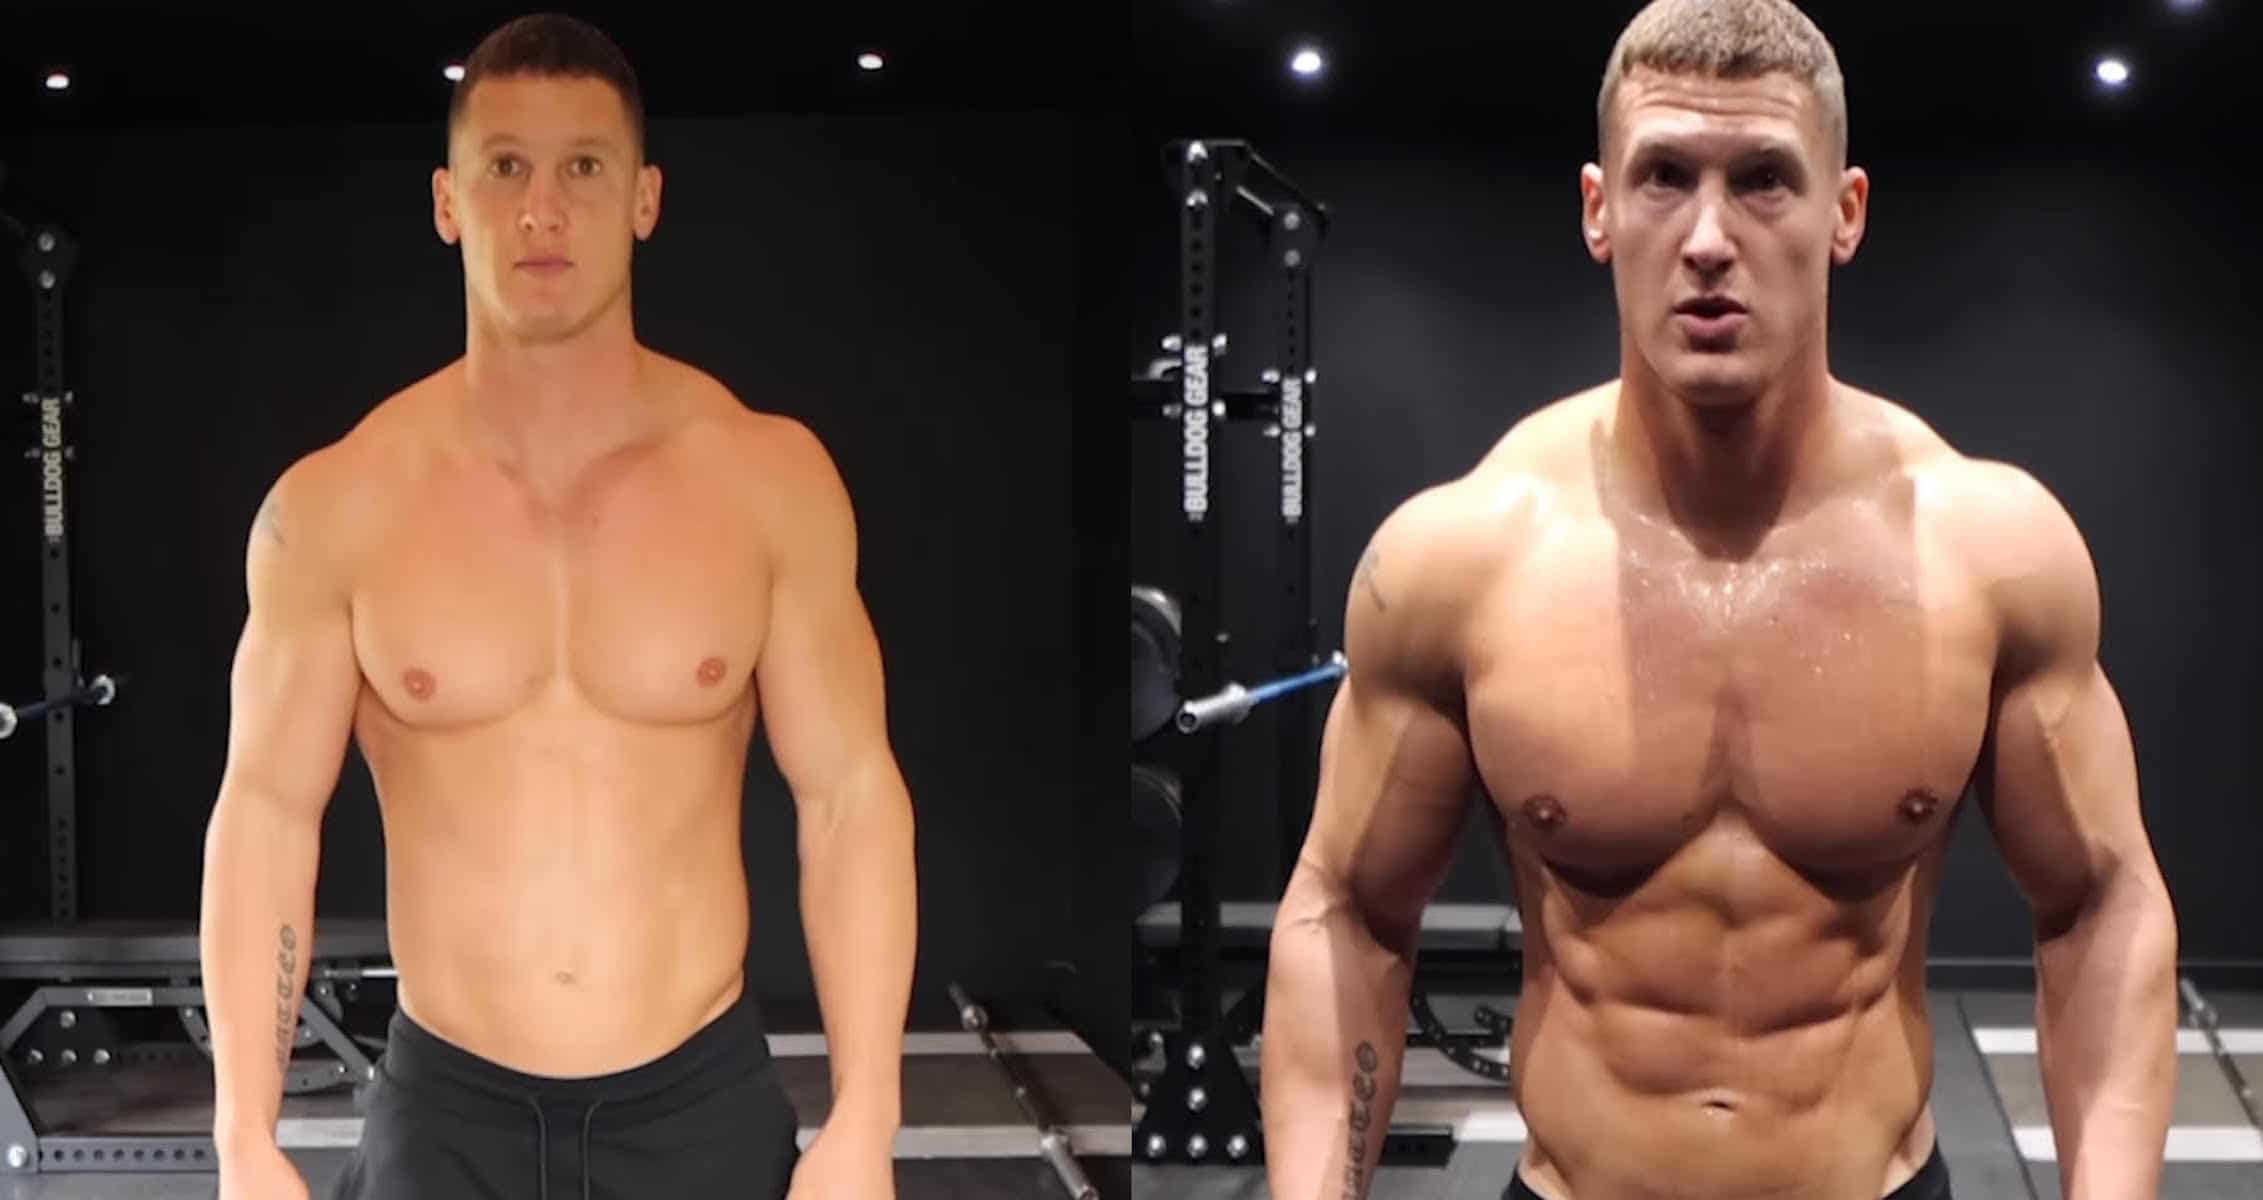 Fitness Influencer Matt Morsia Shows How Easy Gym Photos Are Manipulated With 10-Minute Transformation